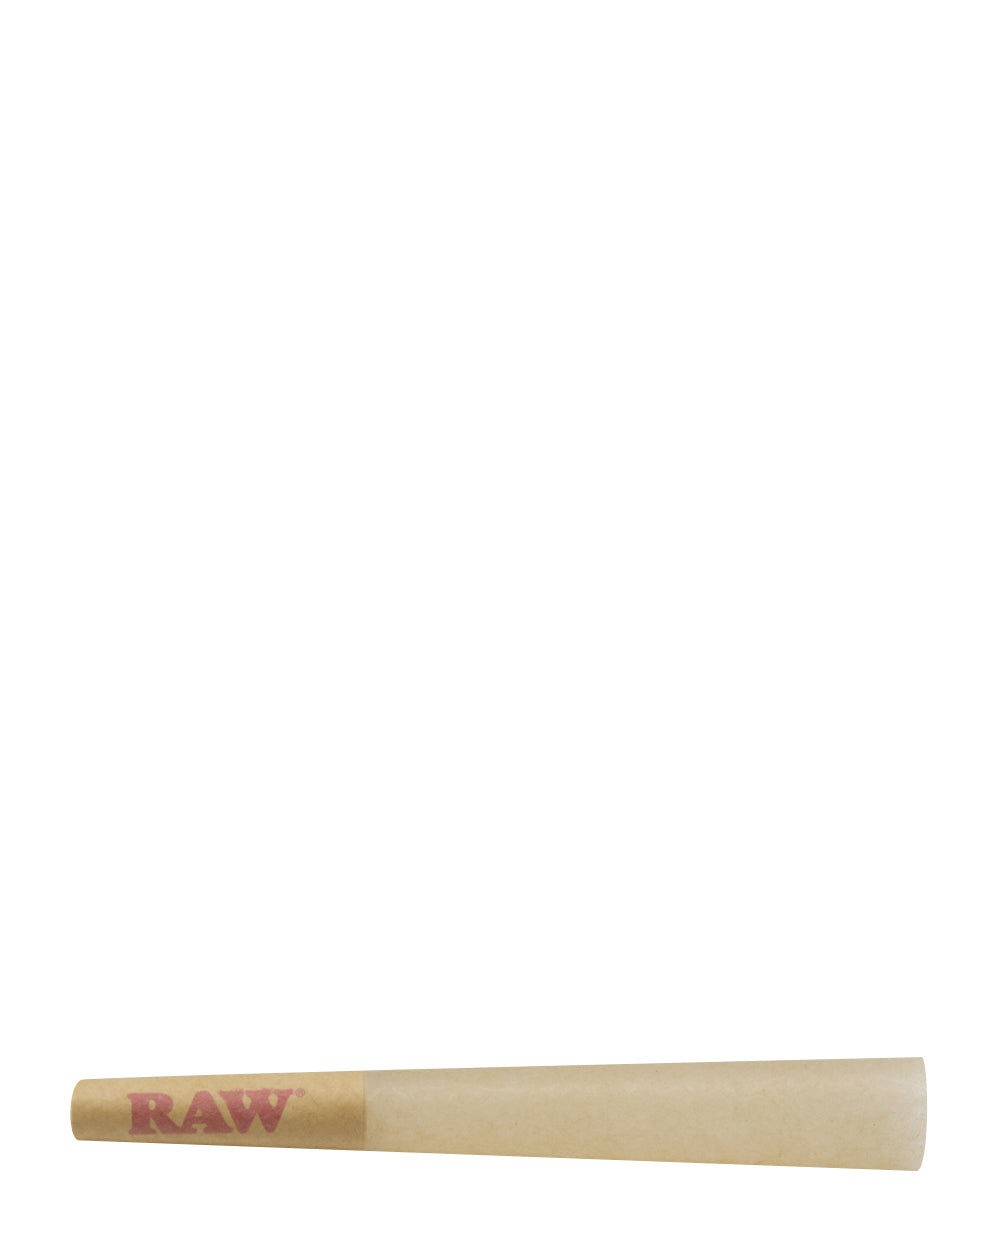 RAW | Classic Single Size Pre-Rolled Cones | 70mm - Unbleached Paper - 1200 Count - 4